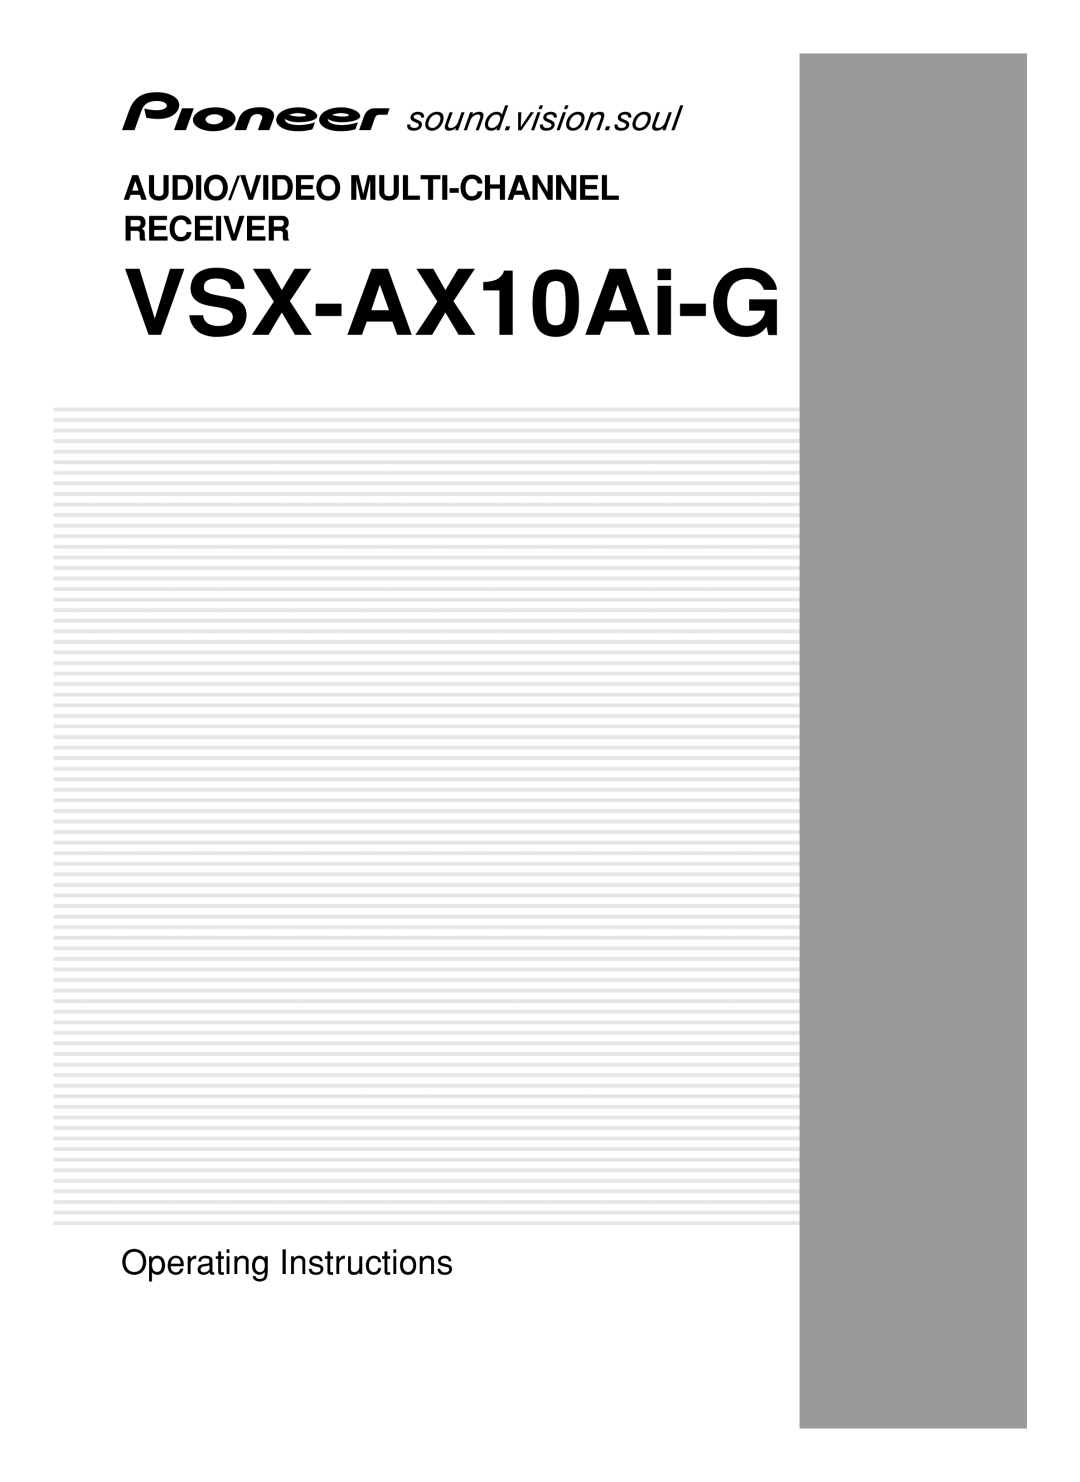 Pioneer VSX-AX10Ai-G manual Audio/Video Multi-Channelreceiver, Operating Instructions 